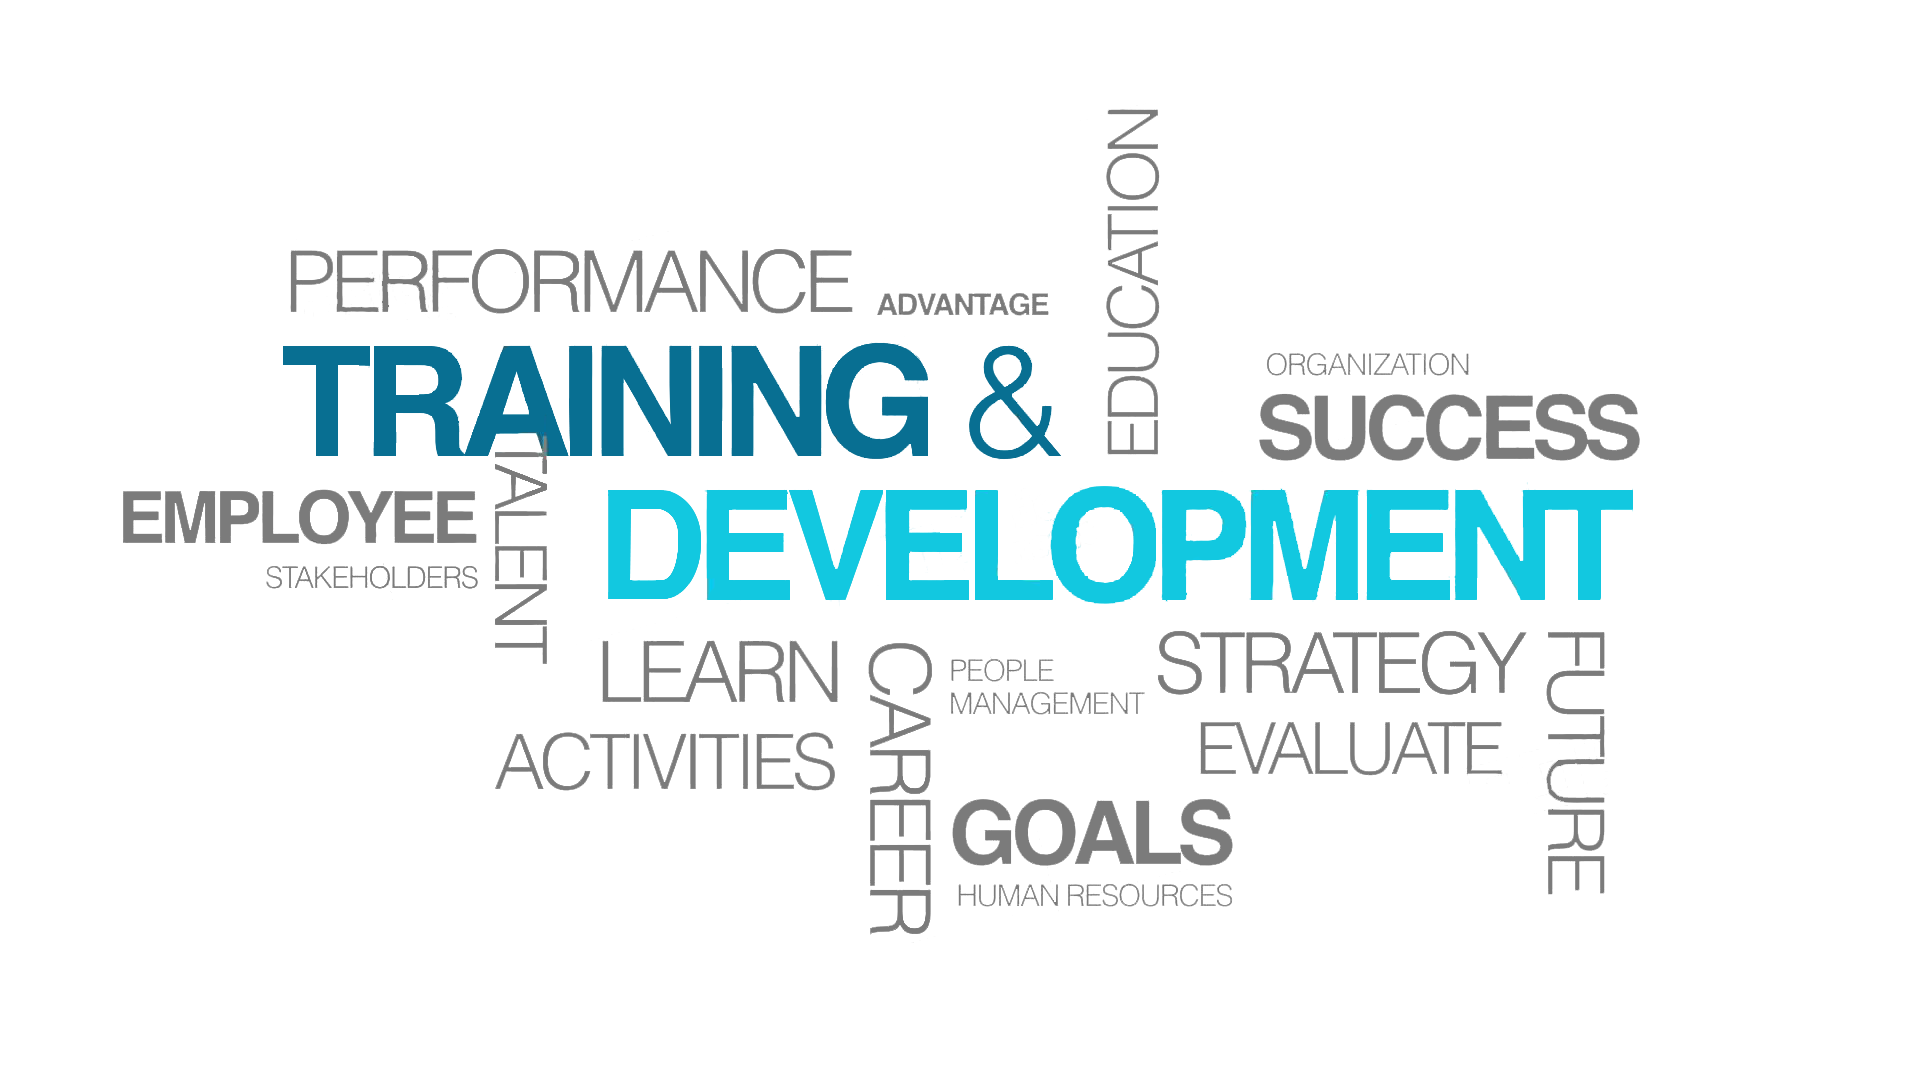 Training and Development. Personel Training and Development. 3. Training and Development. Development quotes. Training development